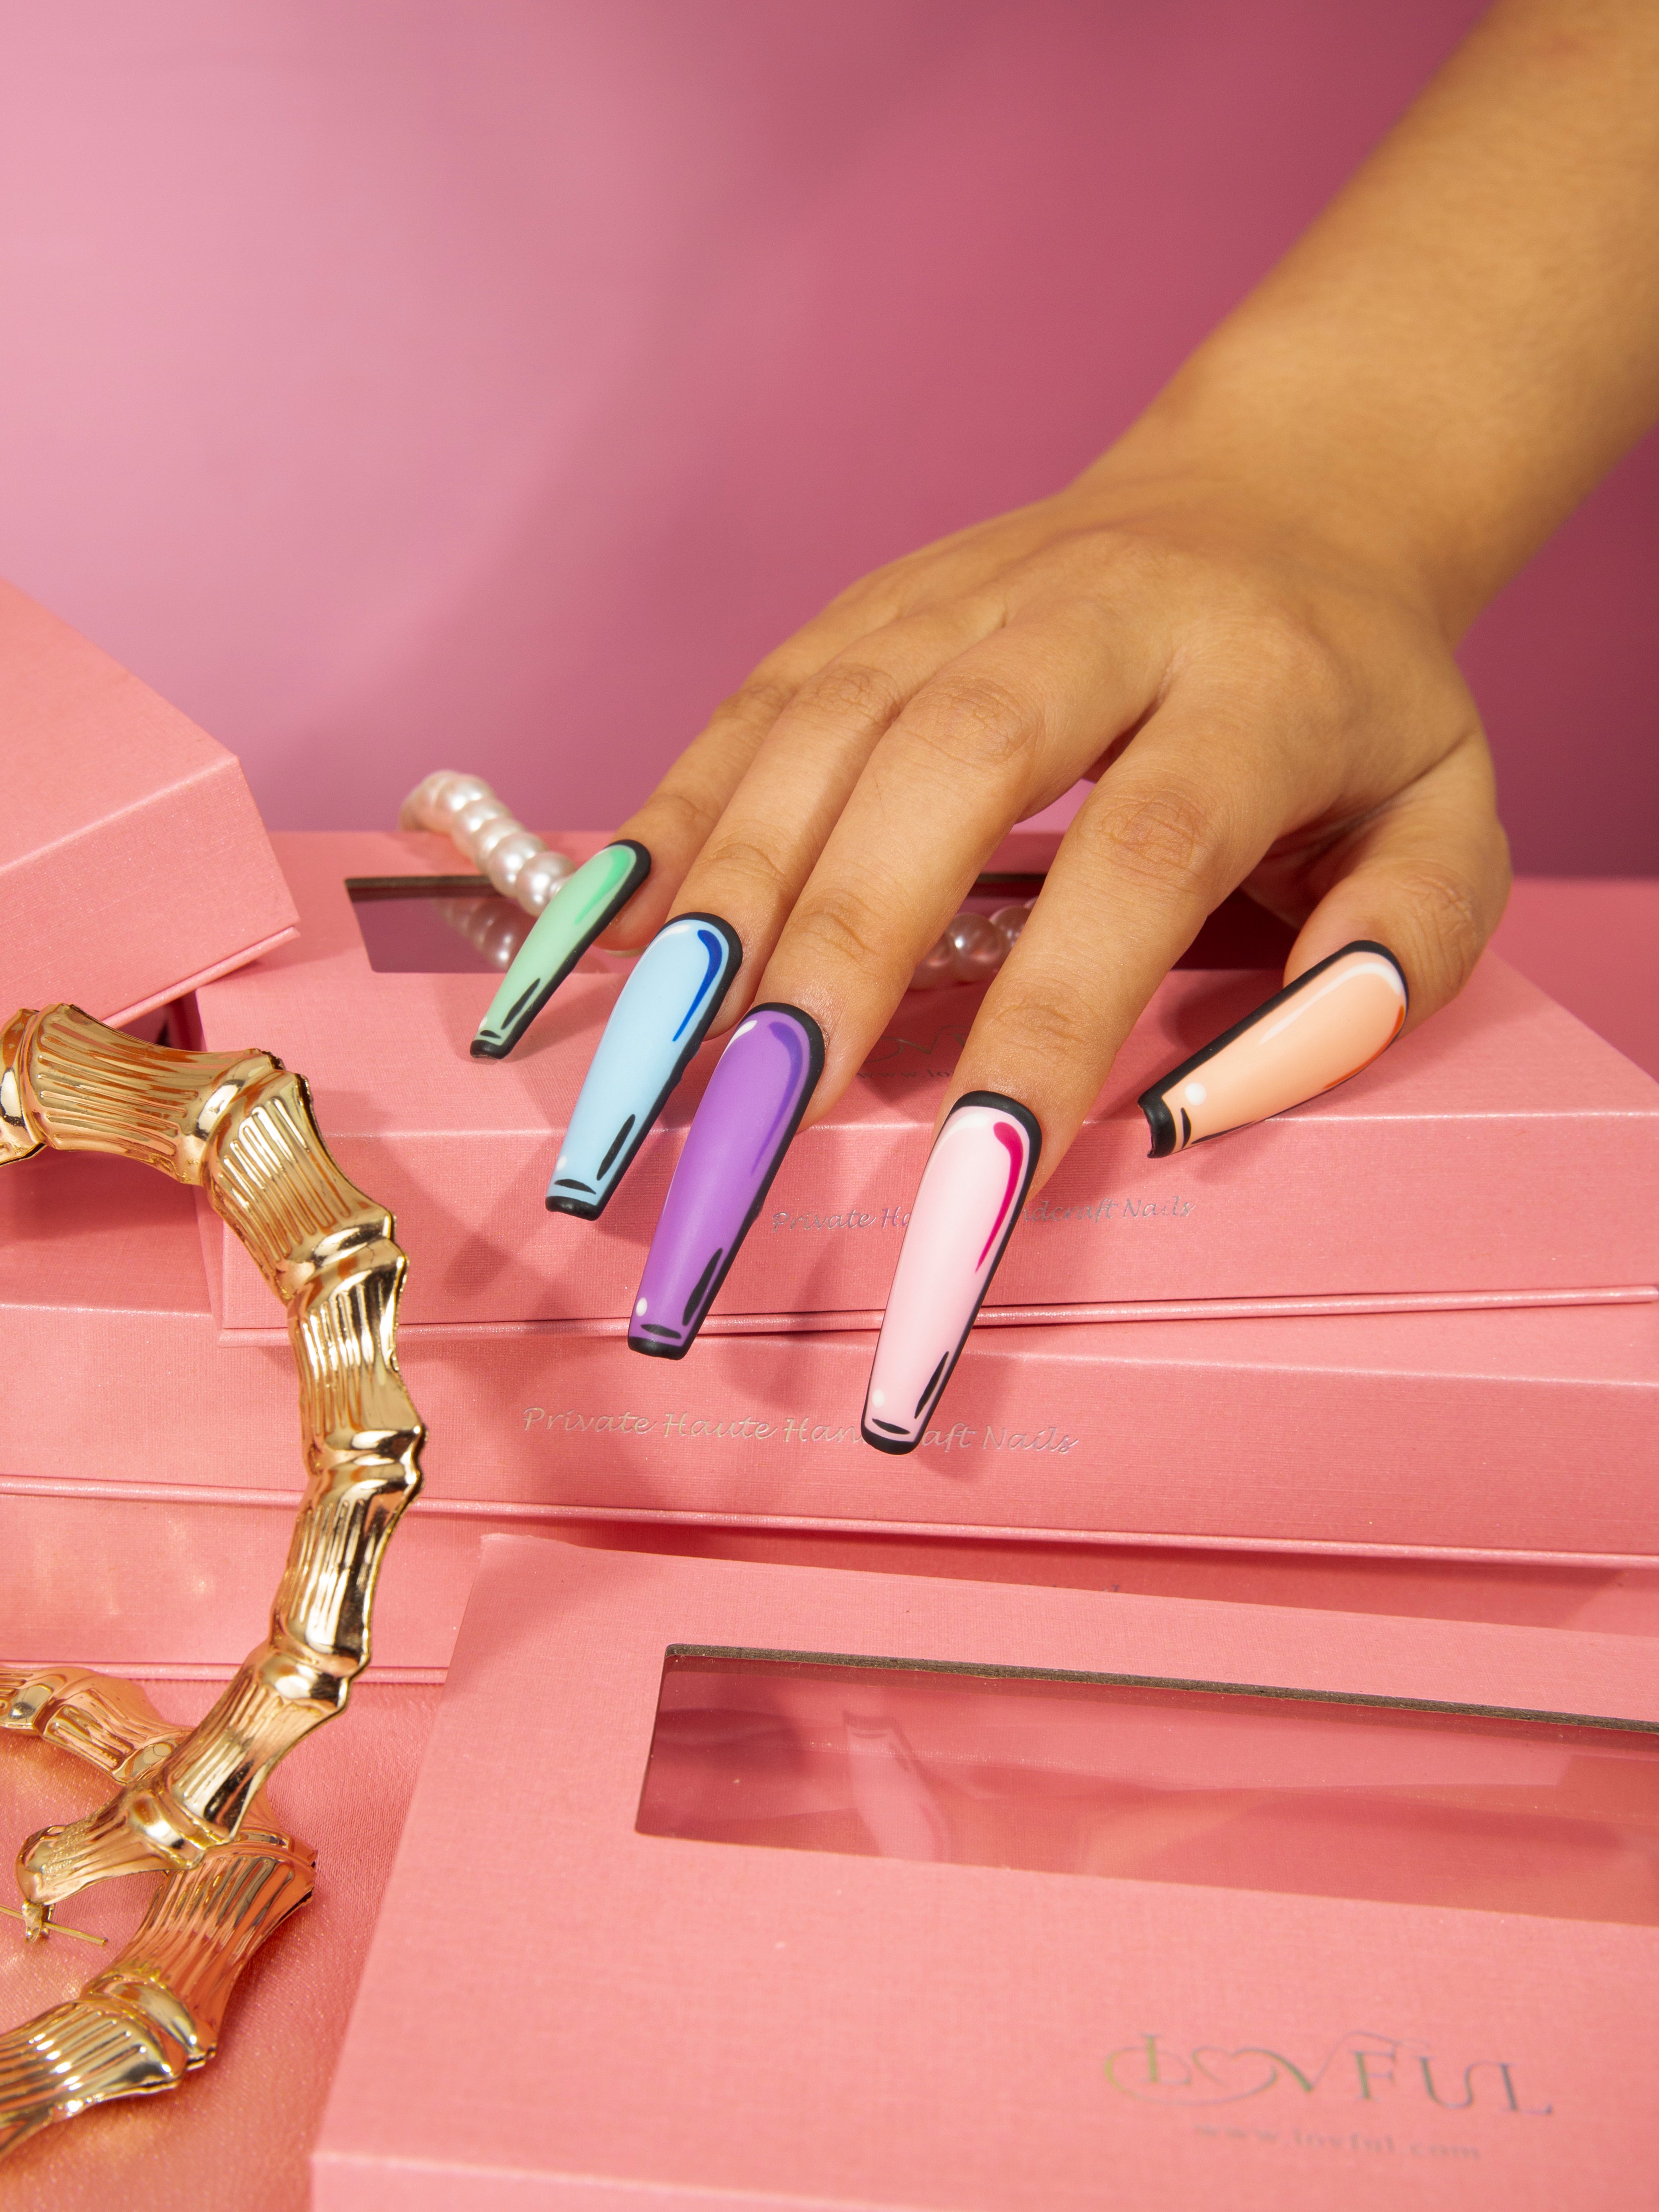 Hand with vibrant pop art press-on nails in blue, purple, pink, and peach colors against pink Lovful product boxes. Gold jewelry enhances the stylish presentation.